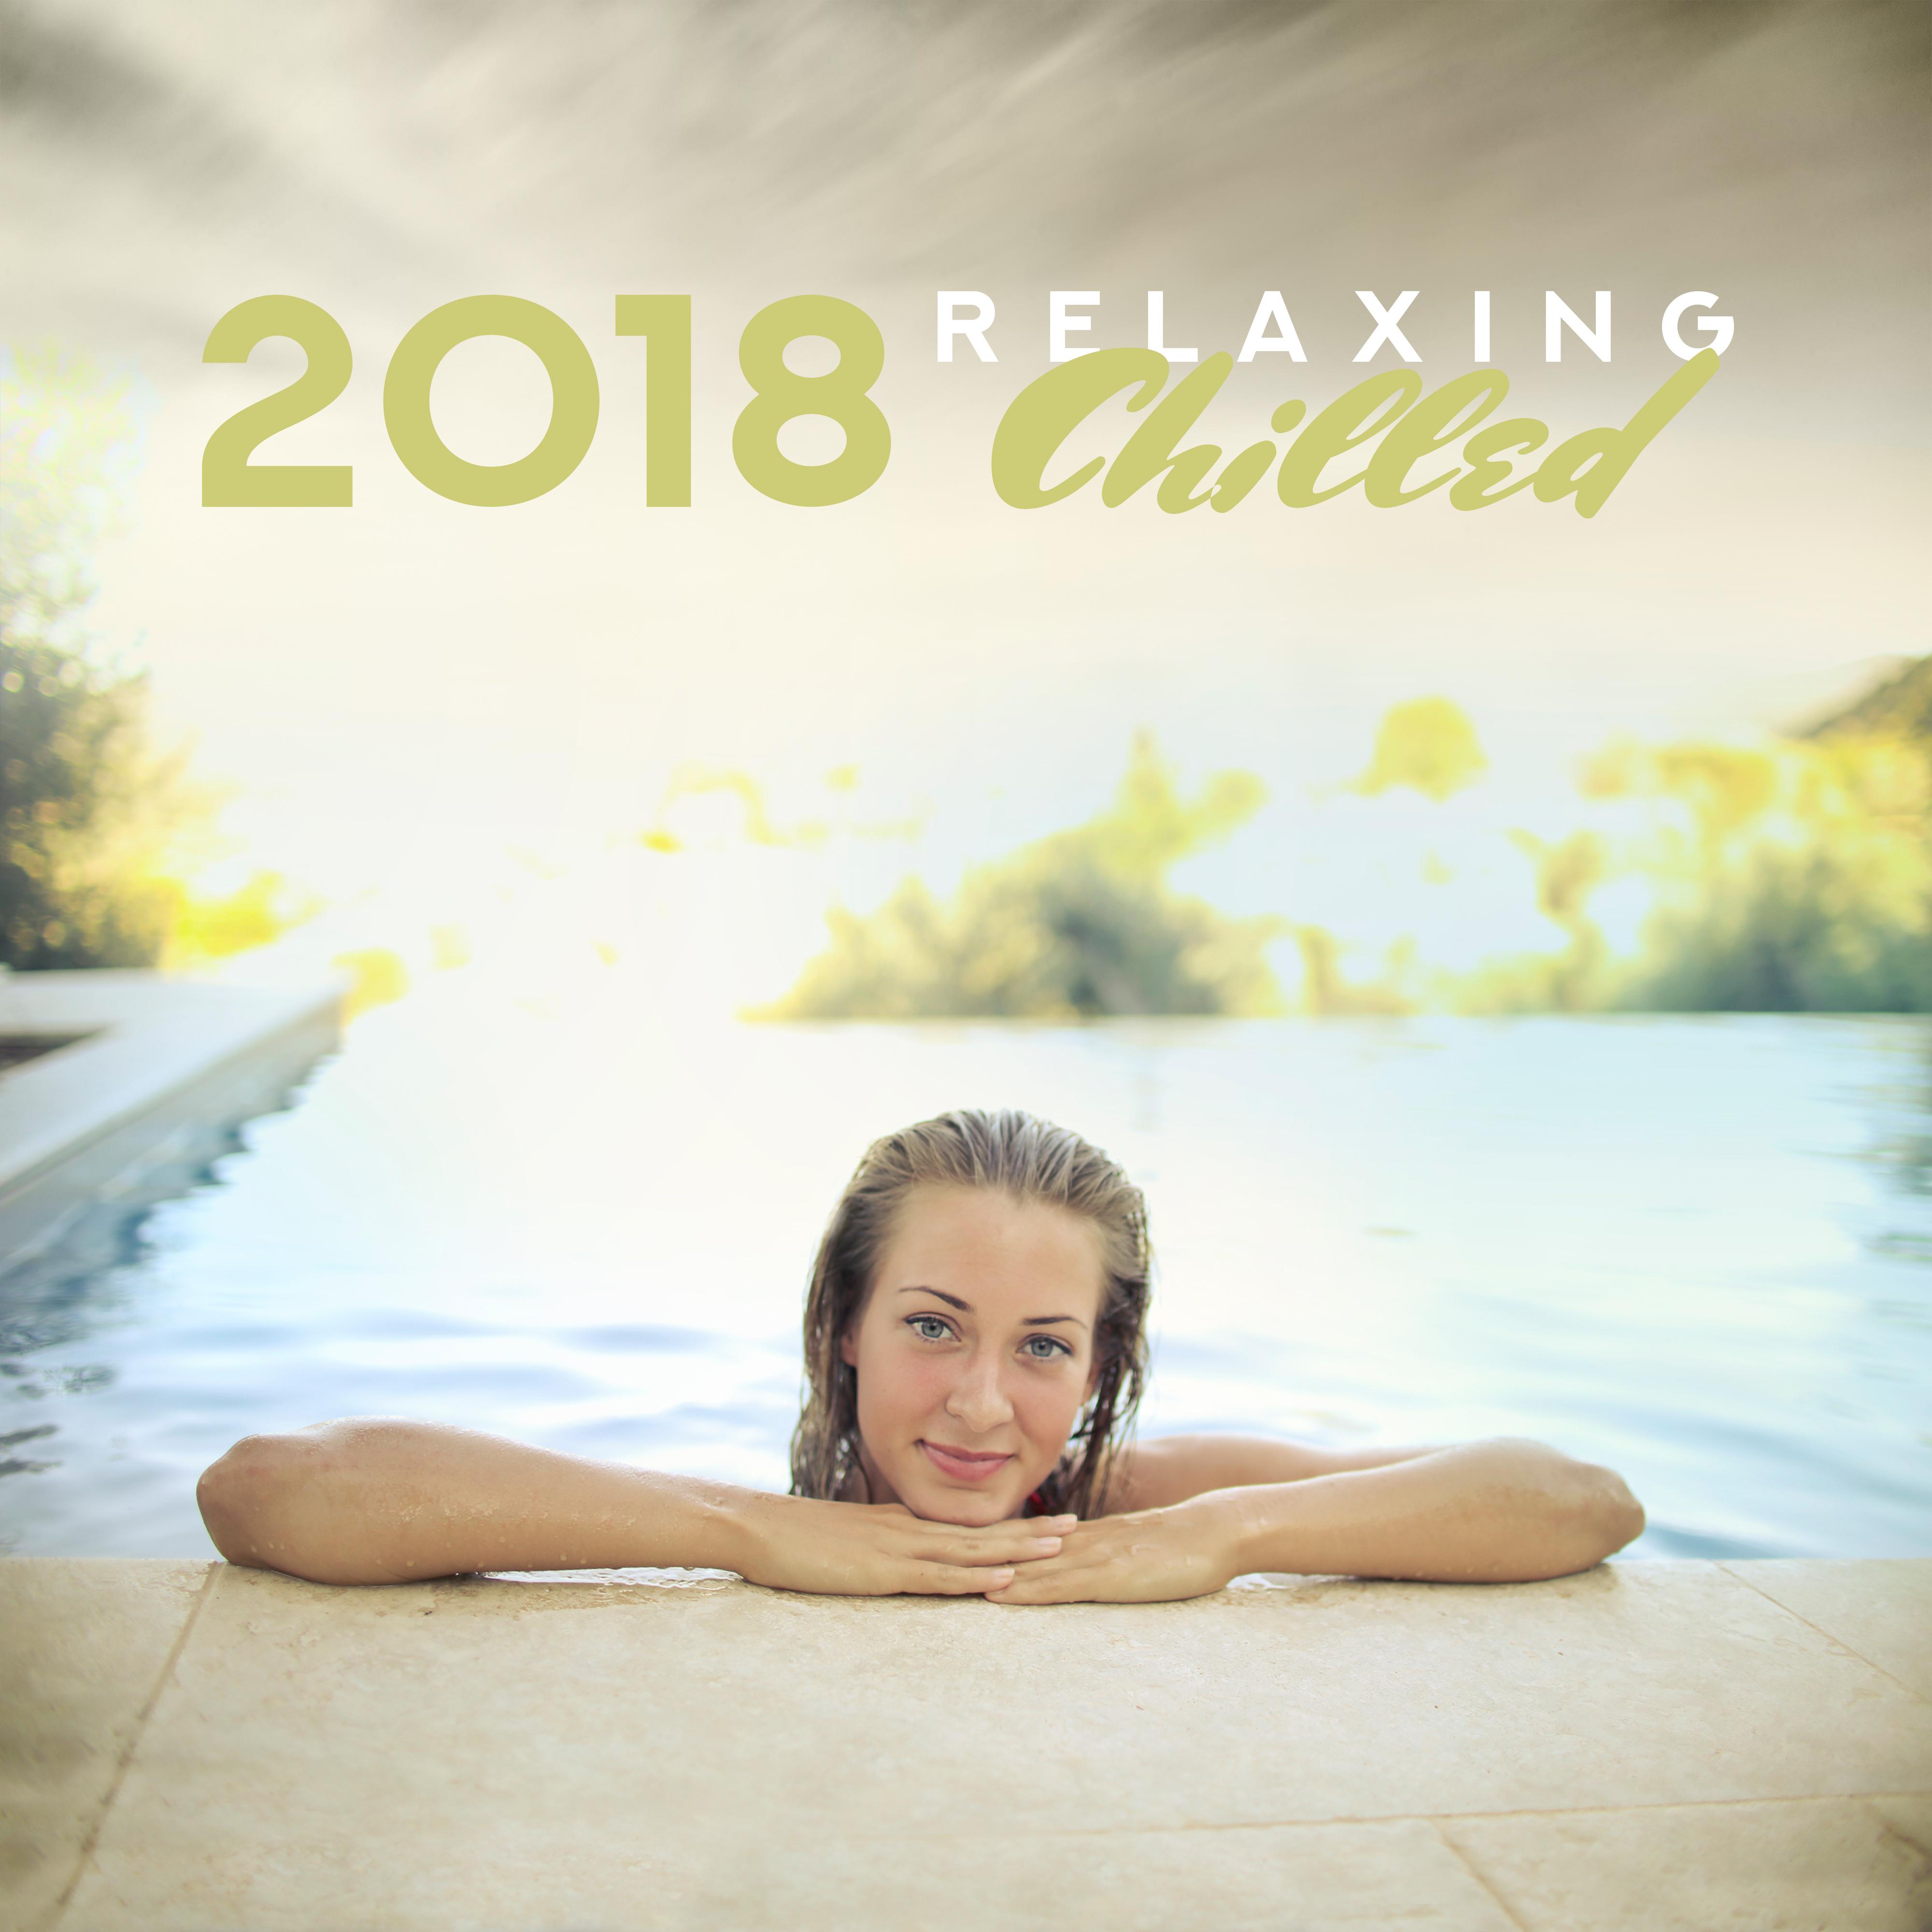 2018 Relaxing Chilled